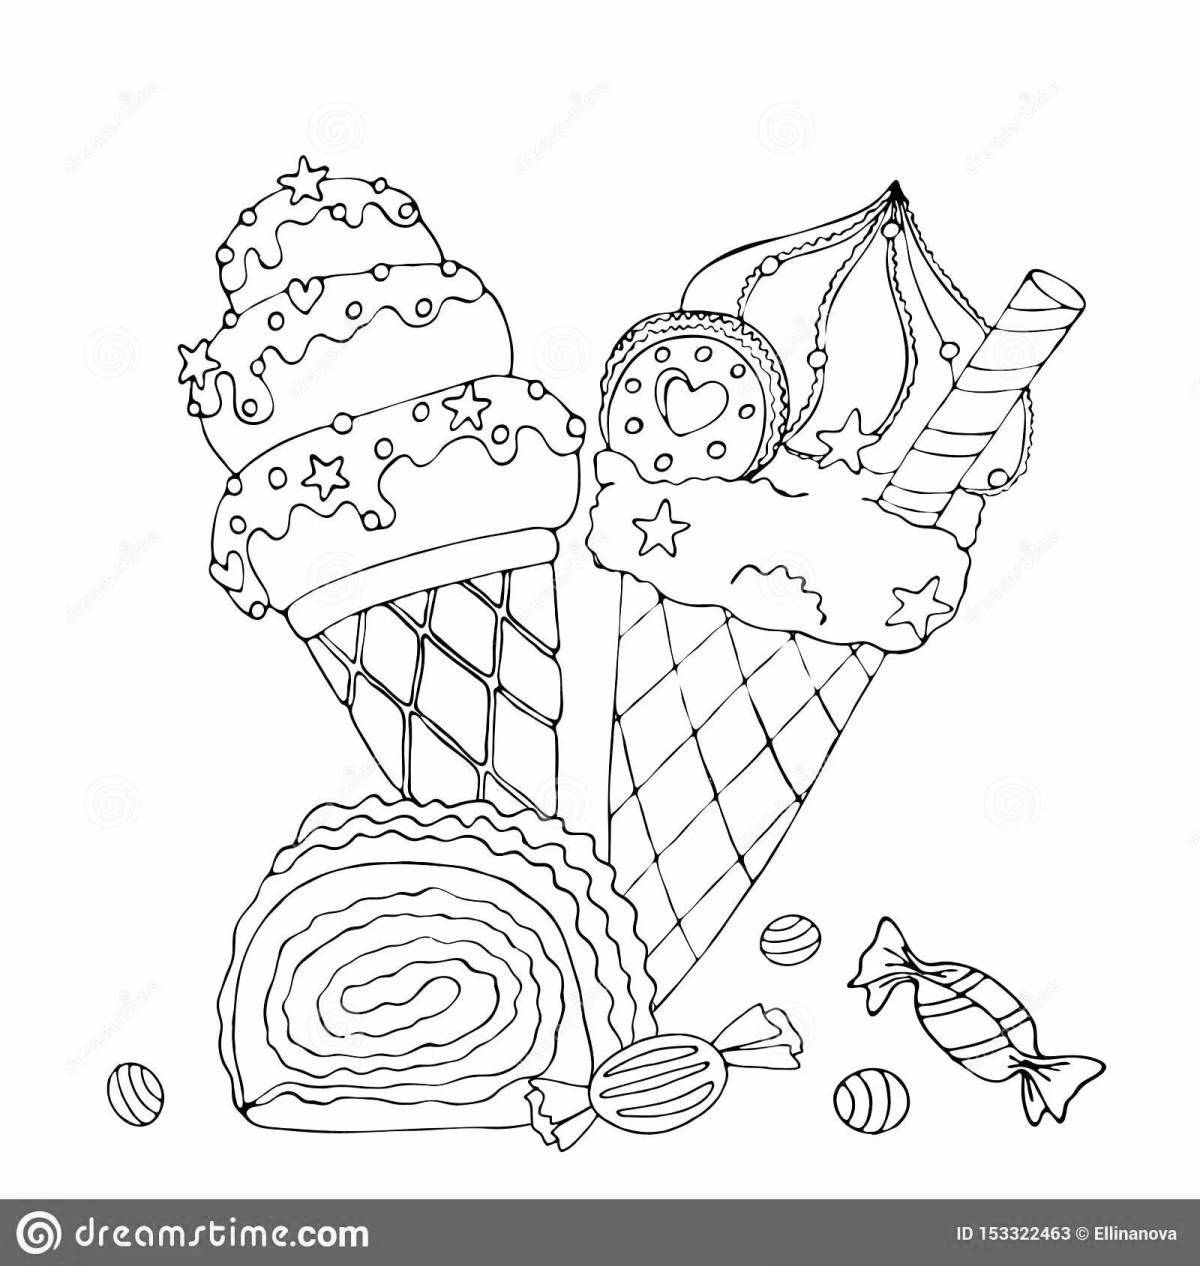 Glowing sweet world coloring page